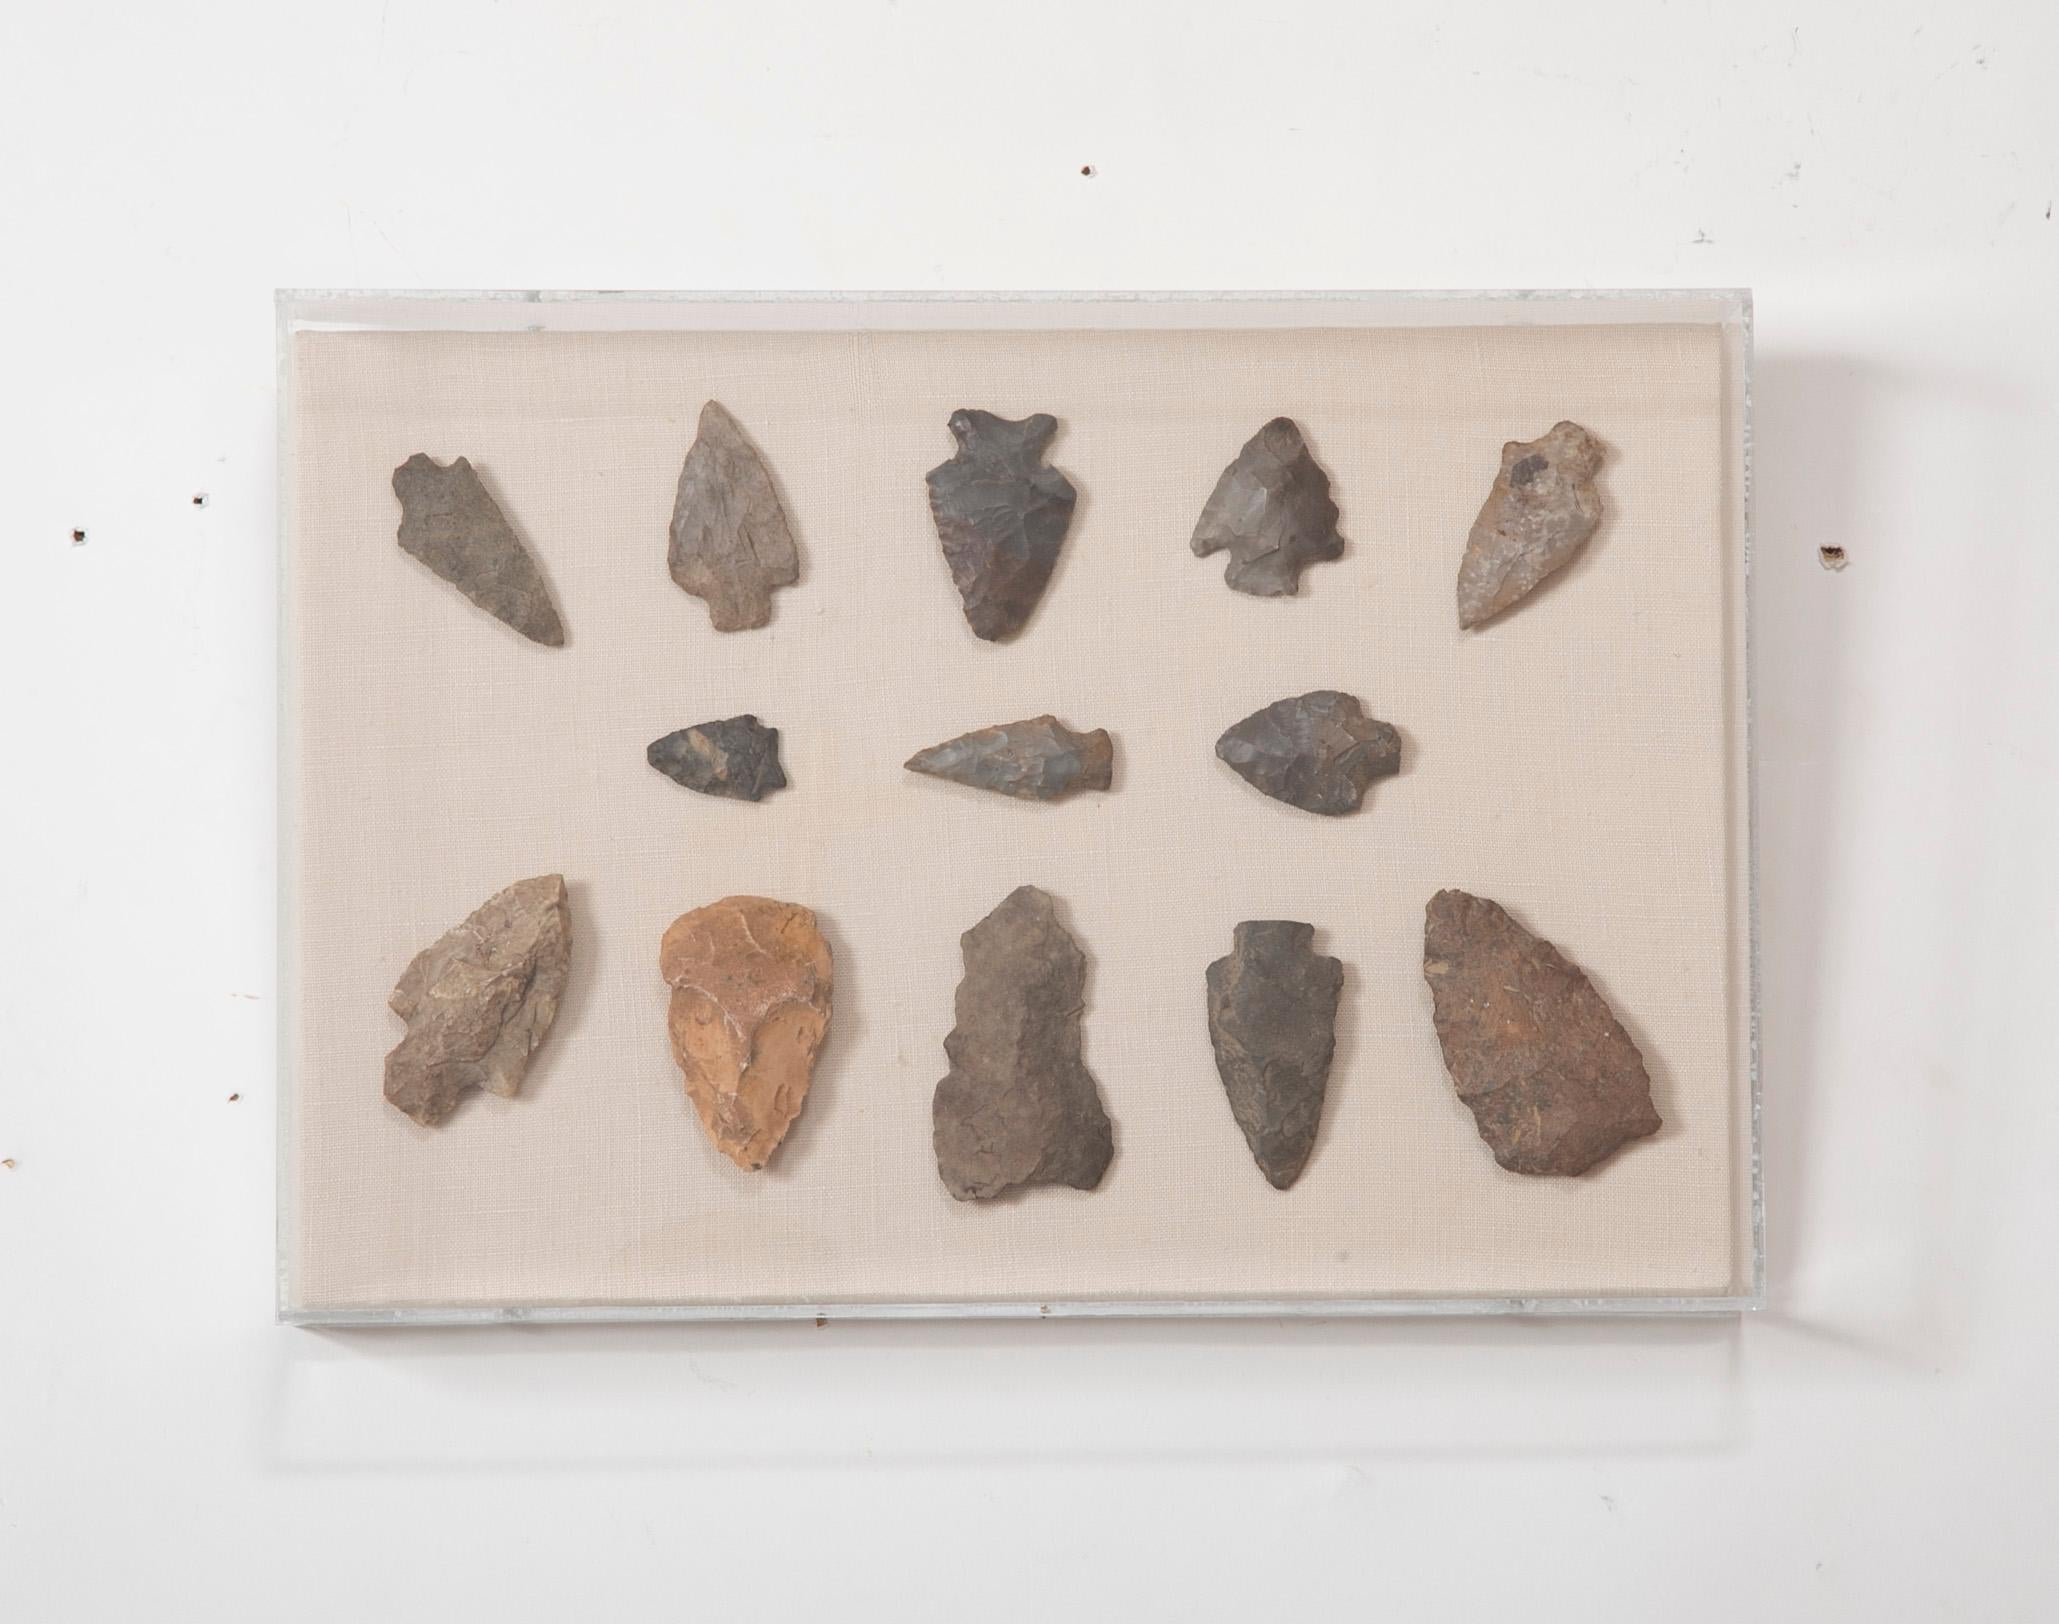 Set of four framed collection of early American Indian hand-hewn stone arrowheads from various Western states. These historical artifacts have been beautifully framed in plexiglass boxes, showing the detail of the surface and subtlety of color. A